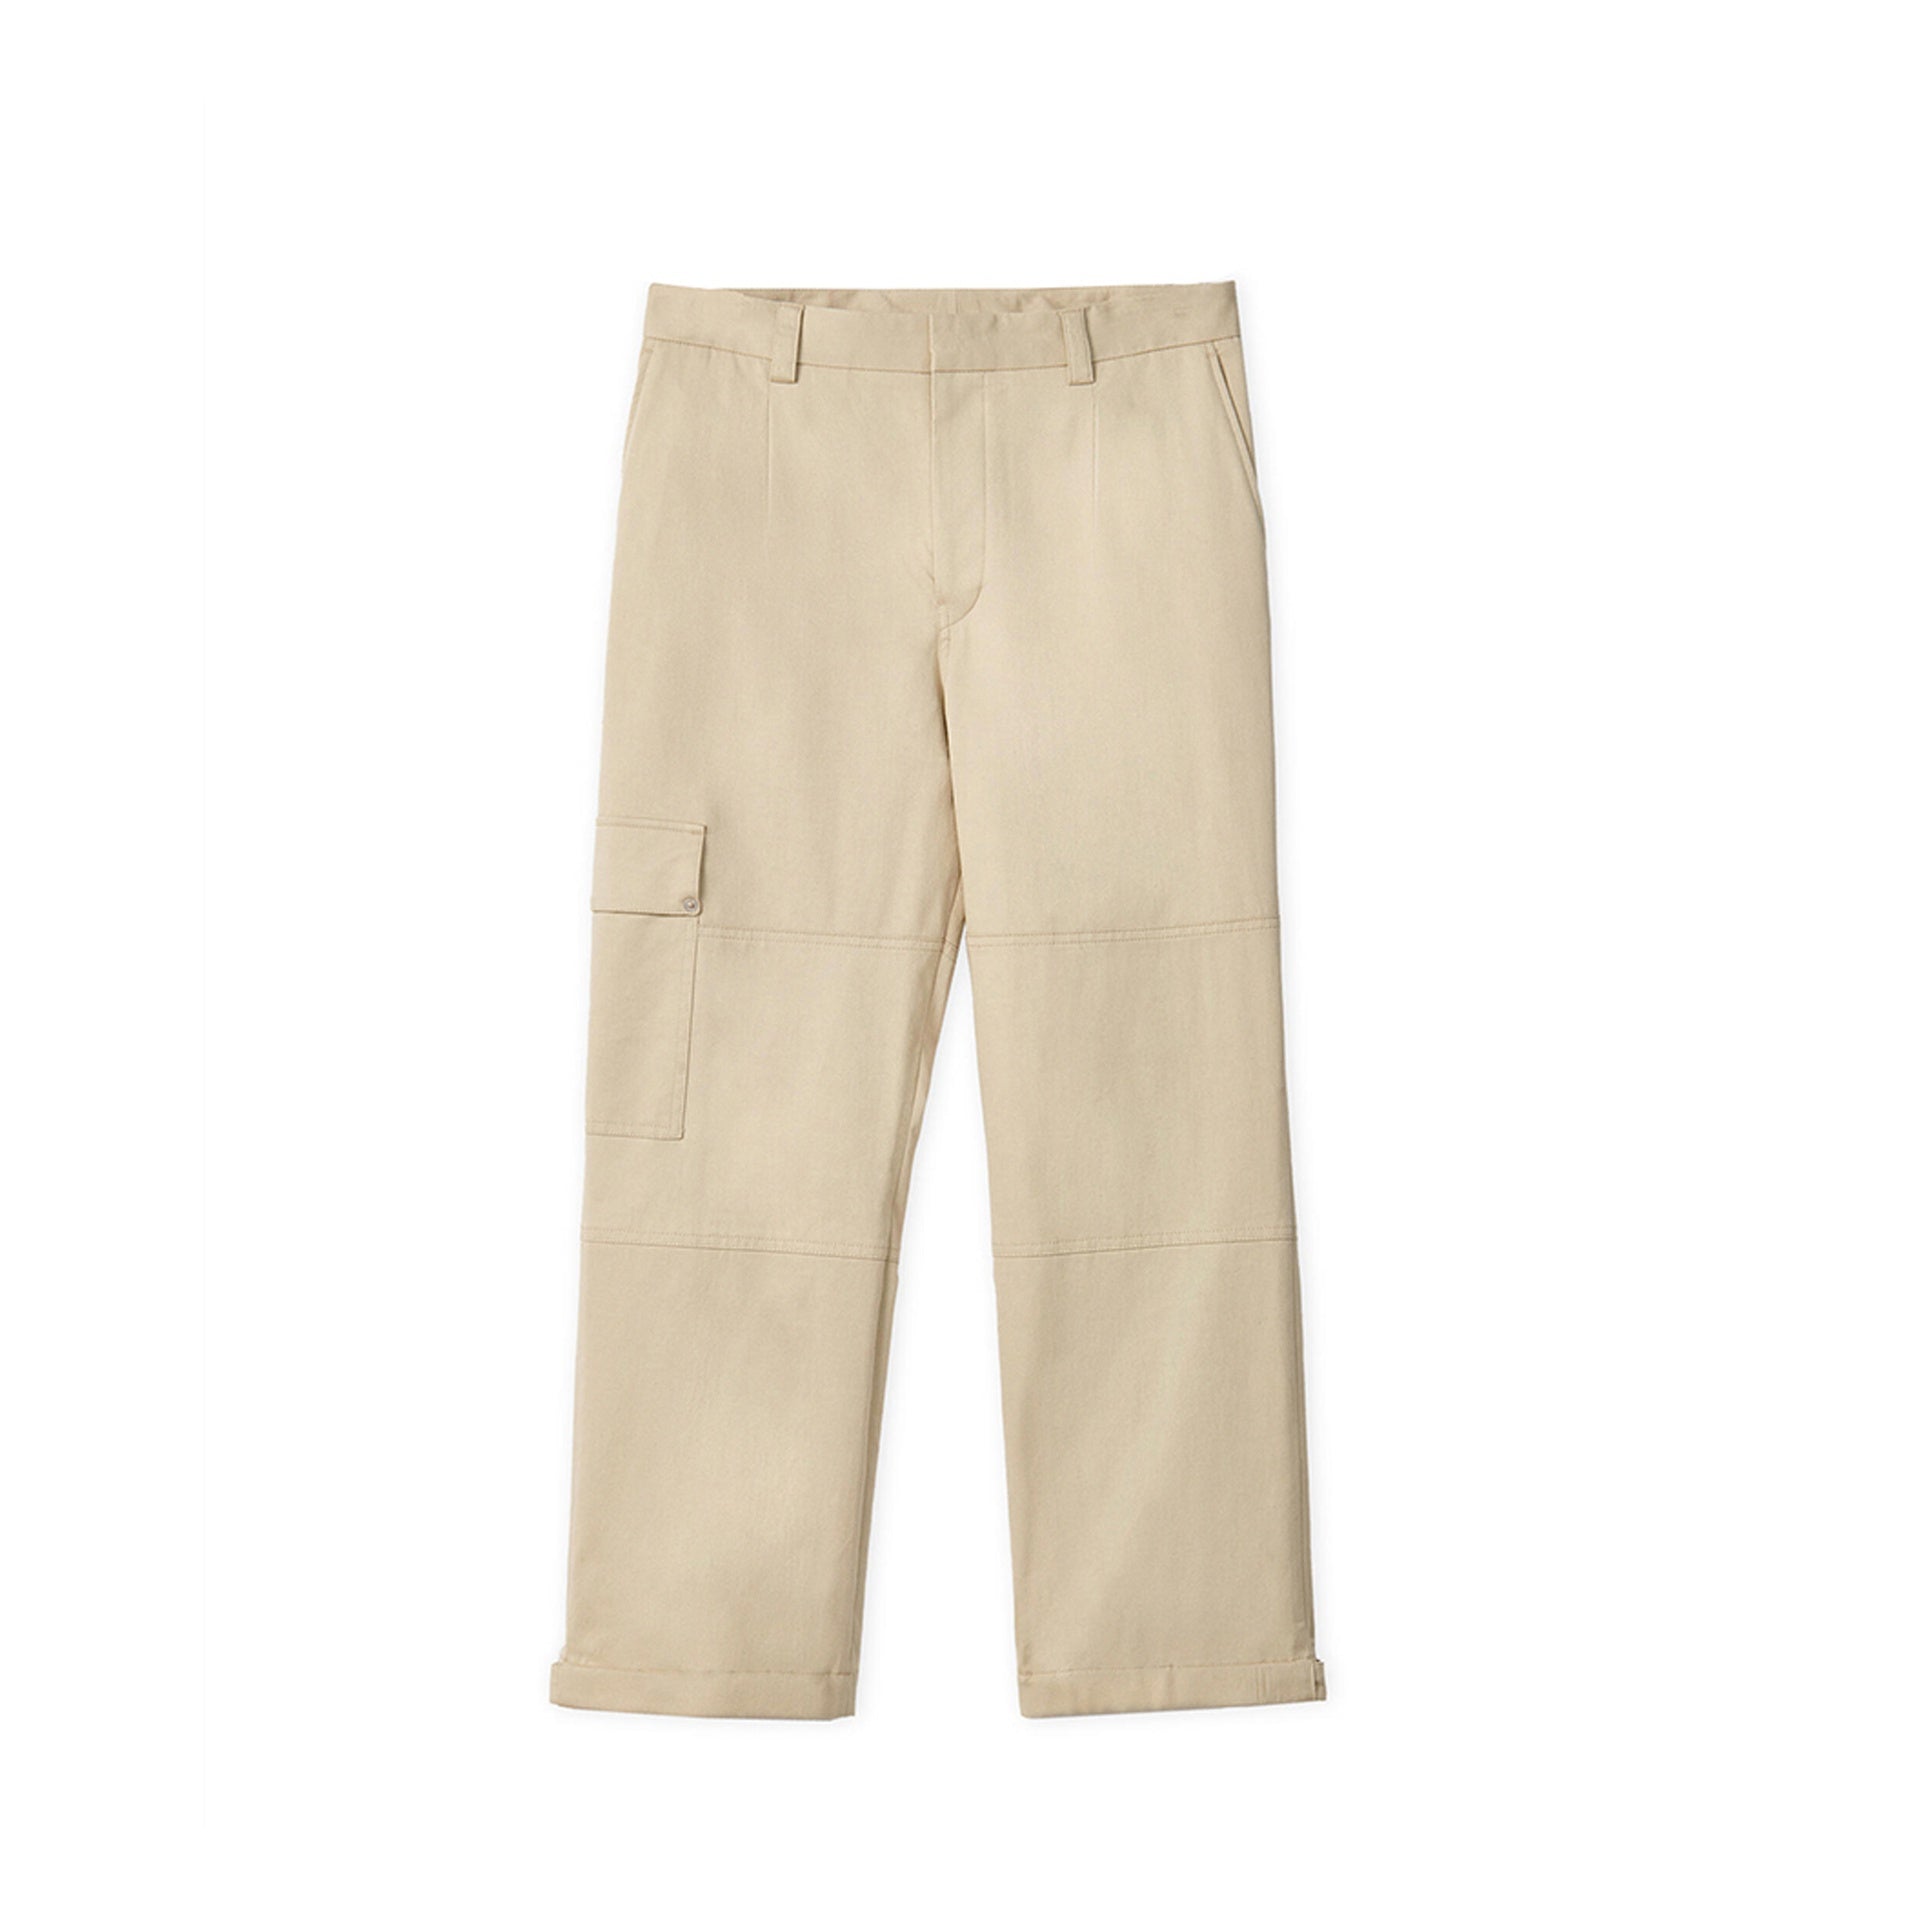 LOEWE-OUTLET-SALE-Loewe-Cropped-Cargo-Trousers-Hosen-BEIGE-50-ARCHIVE-COLLECTION.jpg